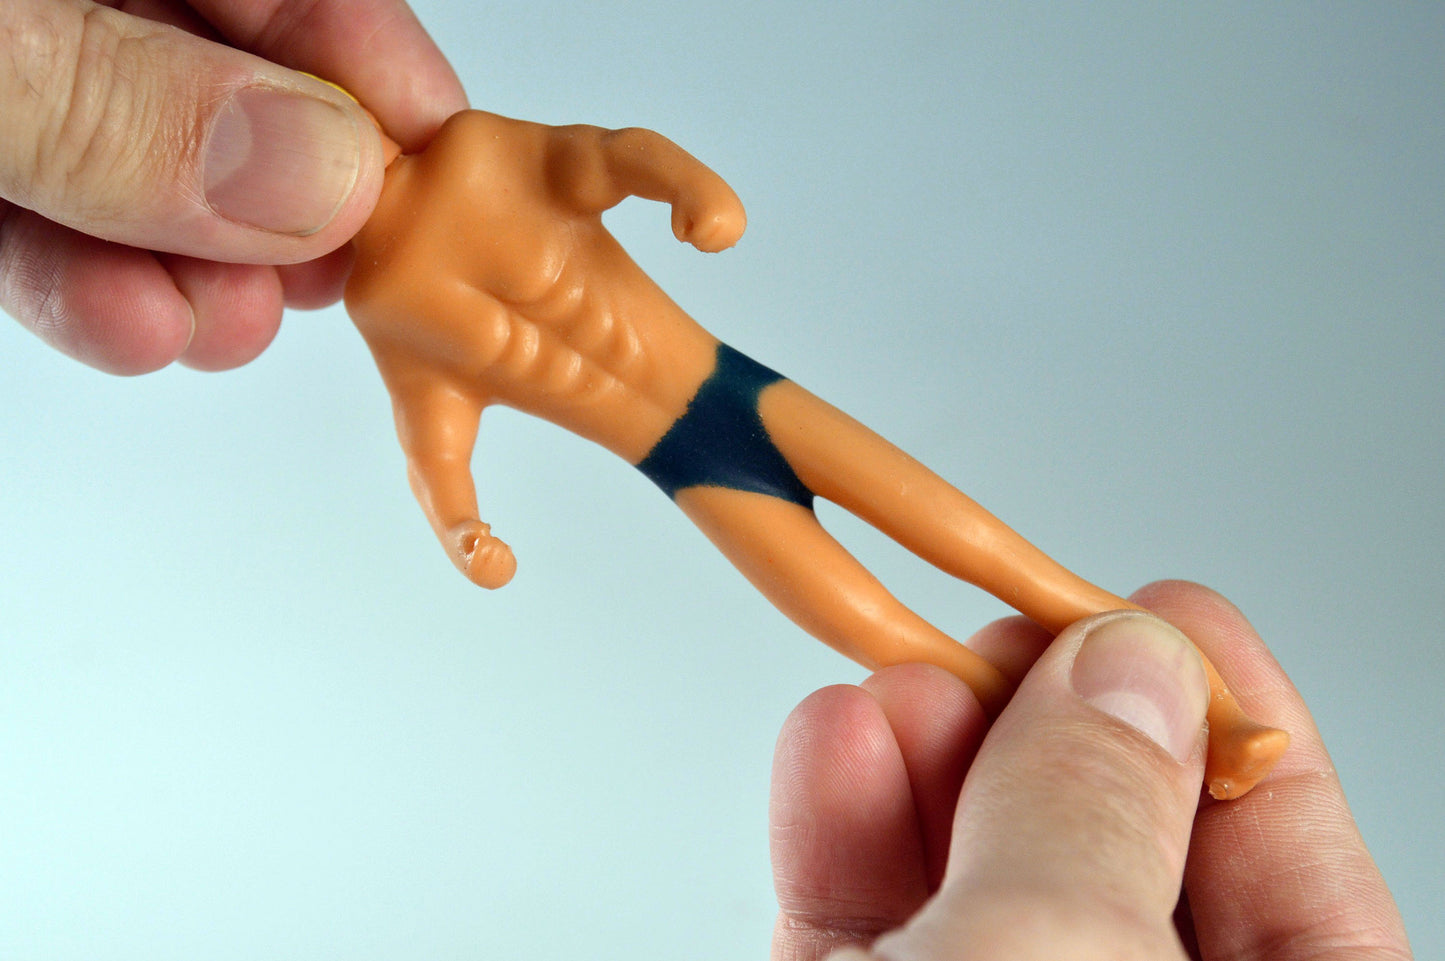 hands stretching stretch armstrong